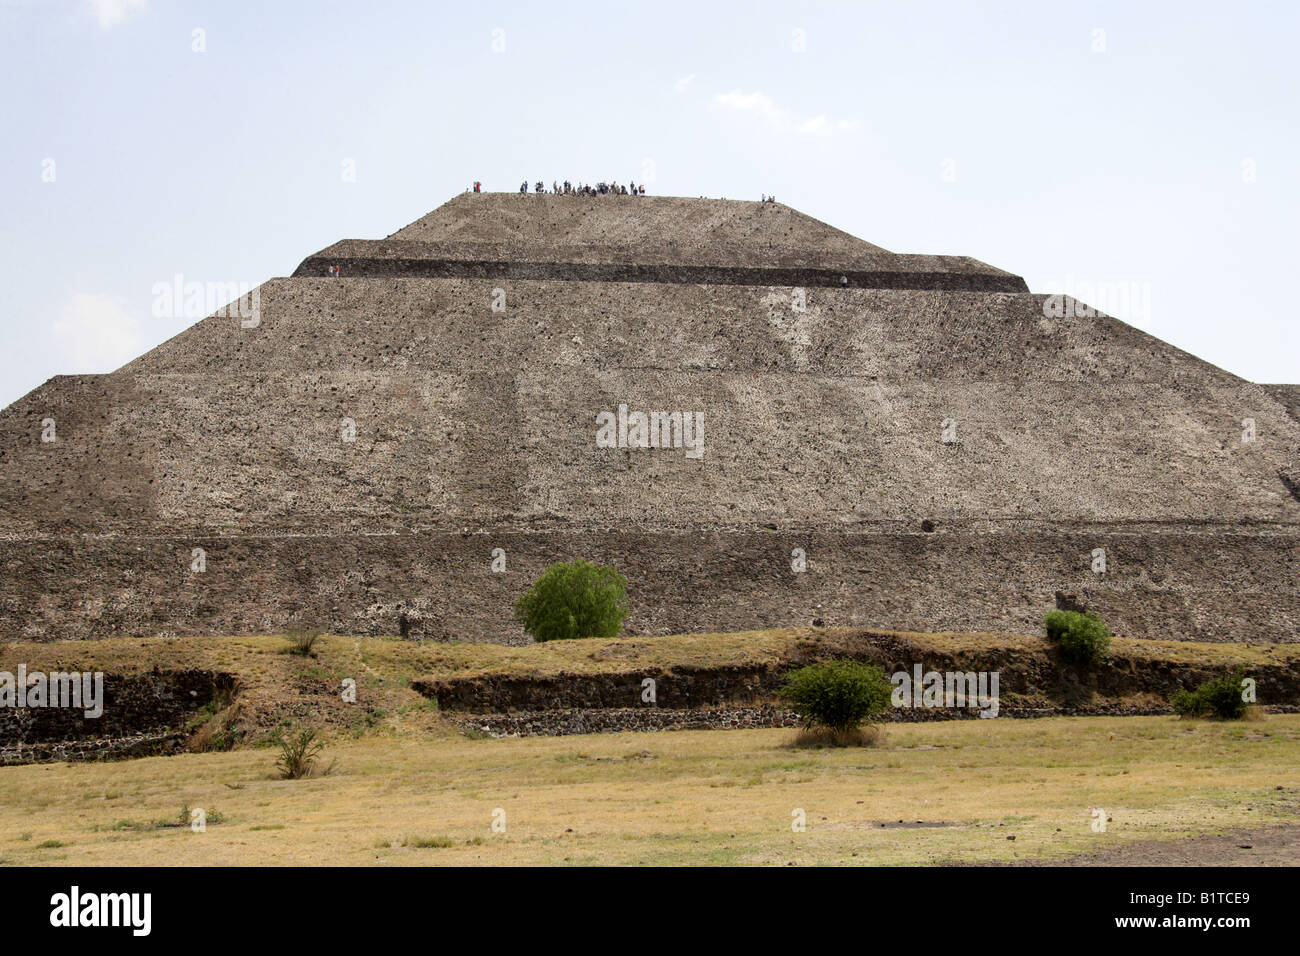 The Pyramid of the Sun, Teotihuacan, Mexico World Heritage Site. Stock Photo